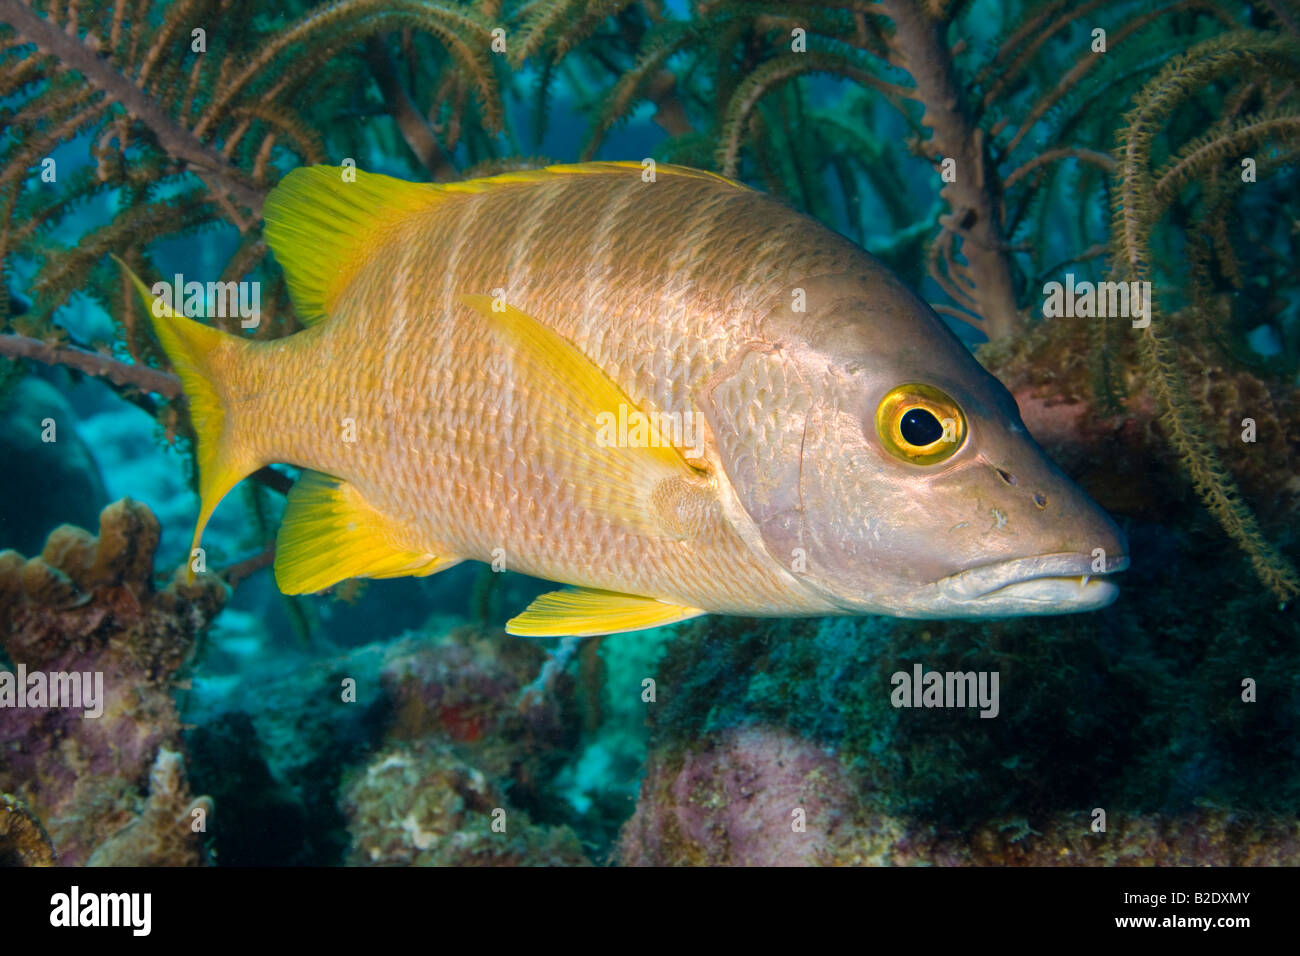 The schoolmaster snapper, Lutjanus apodus, can reach up to 24 inches in length, Bonaire, Netherlands Antilles, Caribbean. Stock Photo